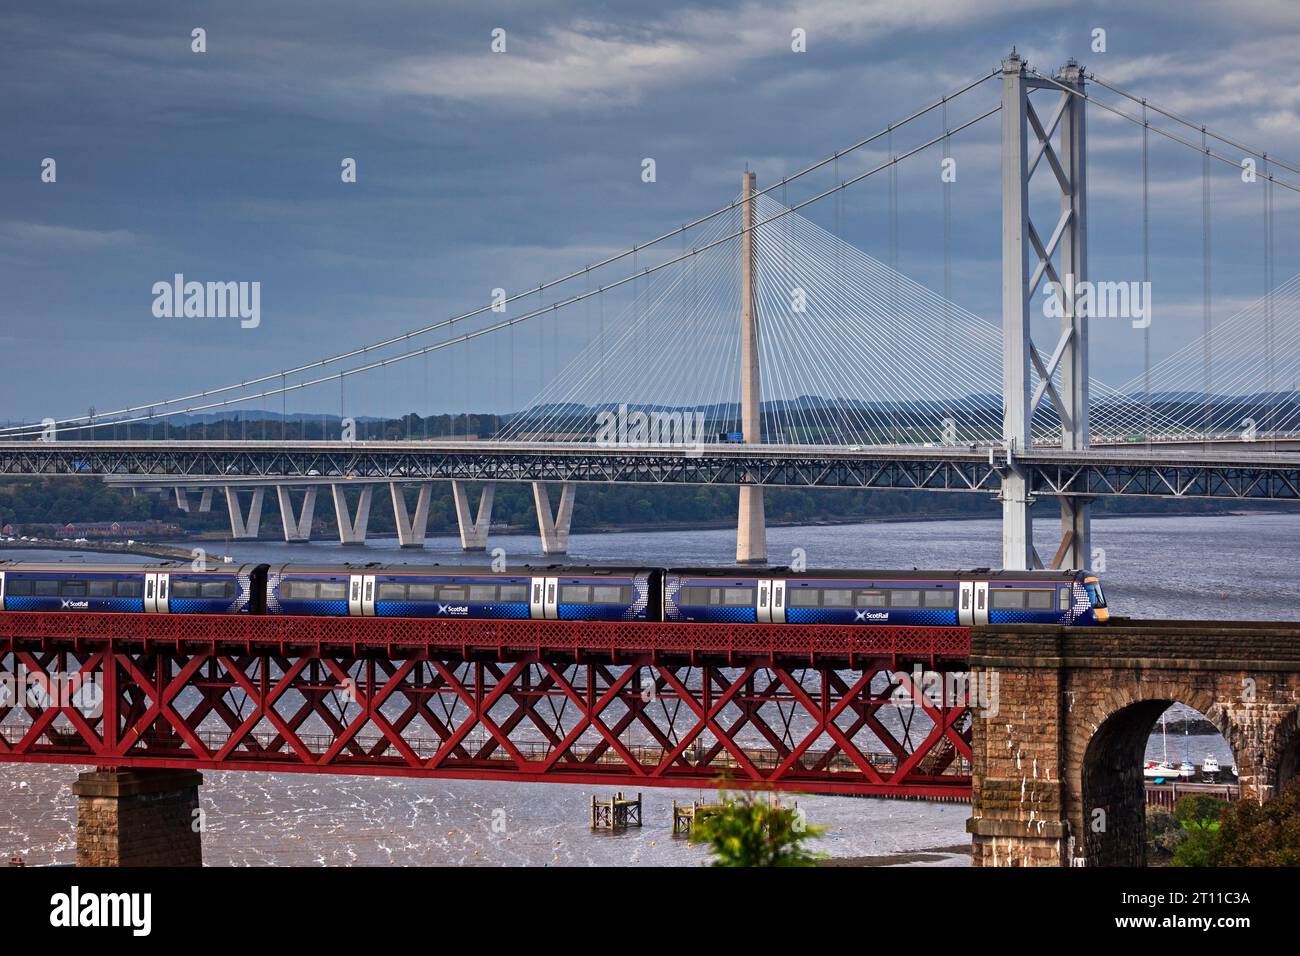 Scotrail diesel train crossing Forth Rail Bridge with Forth Road Bridge and Queensferry Crossing in background, North Queensferry, Fife, Scotland, UK Stock Photo